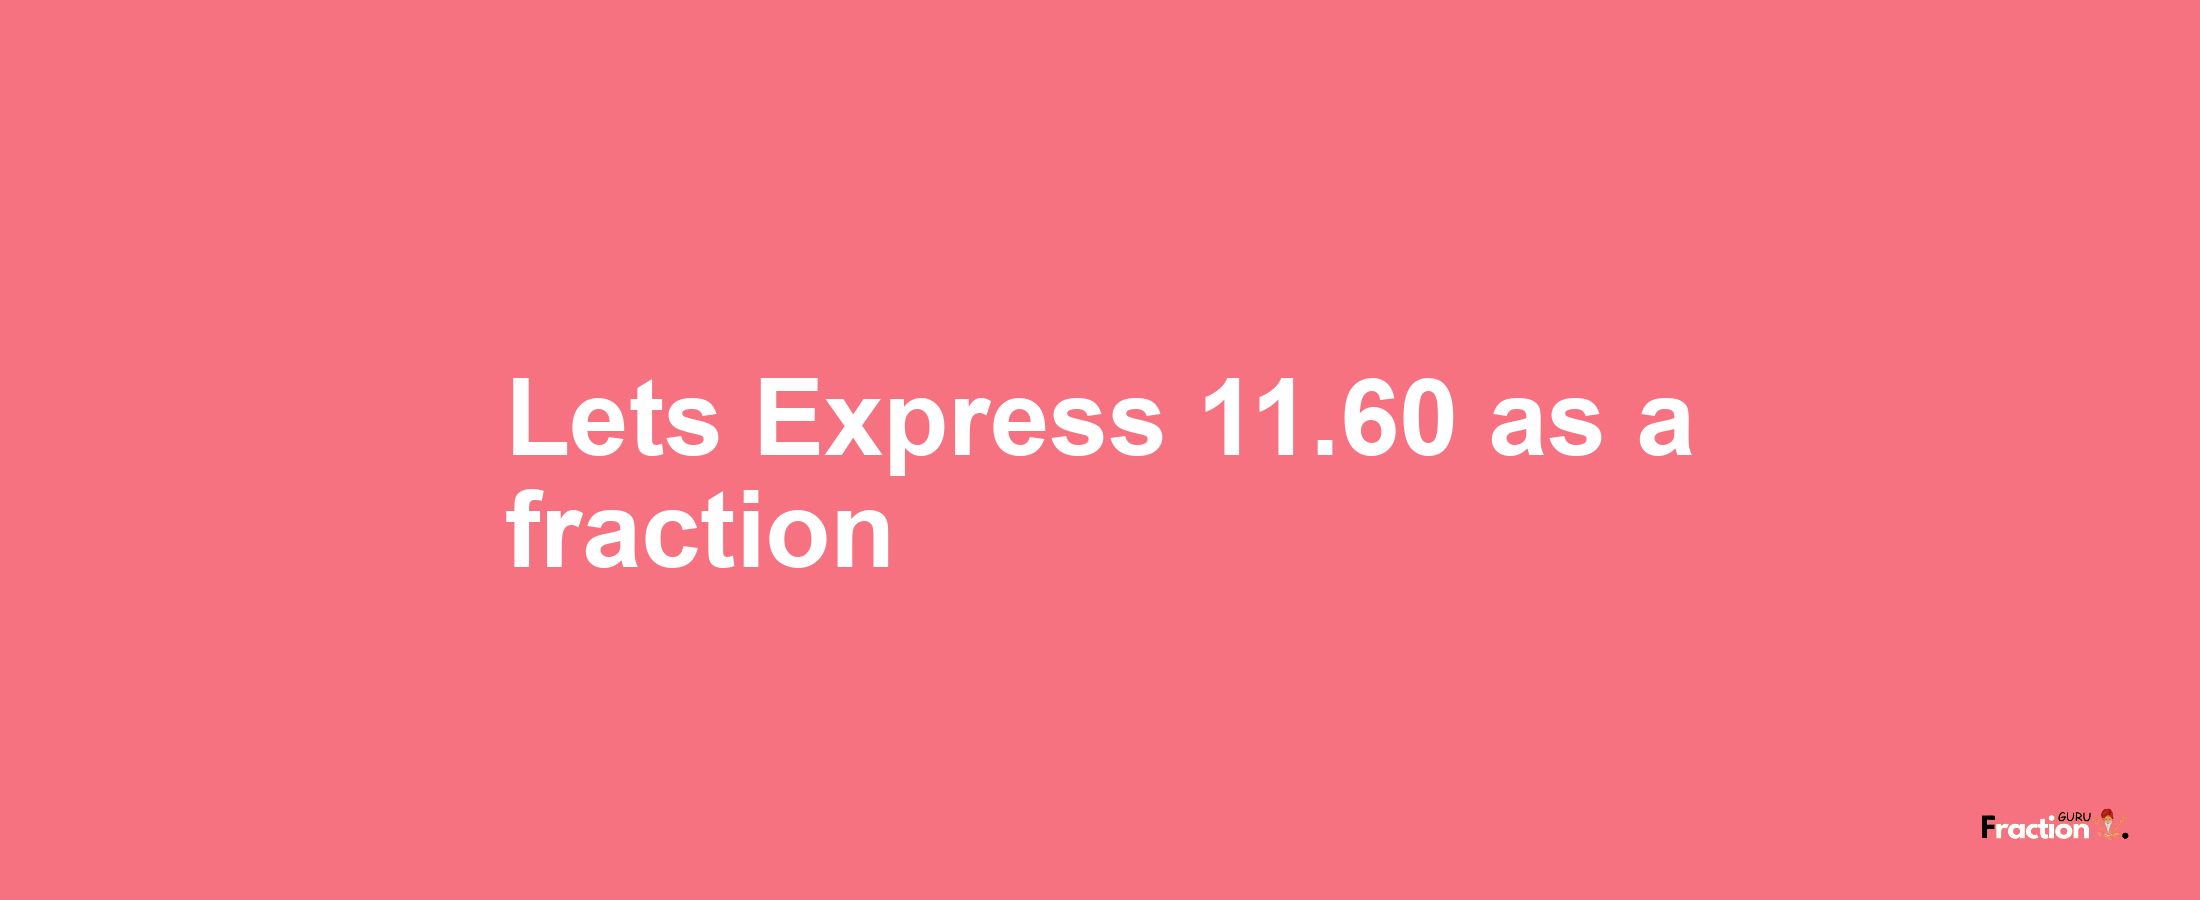 Lets Express 11.60 as afraction